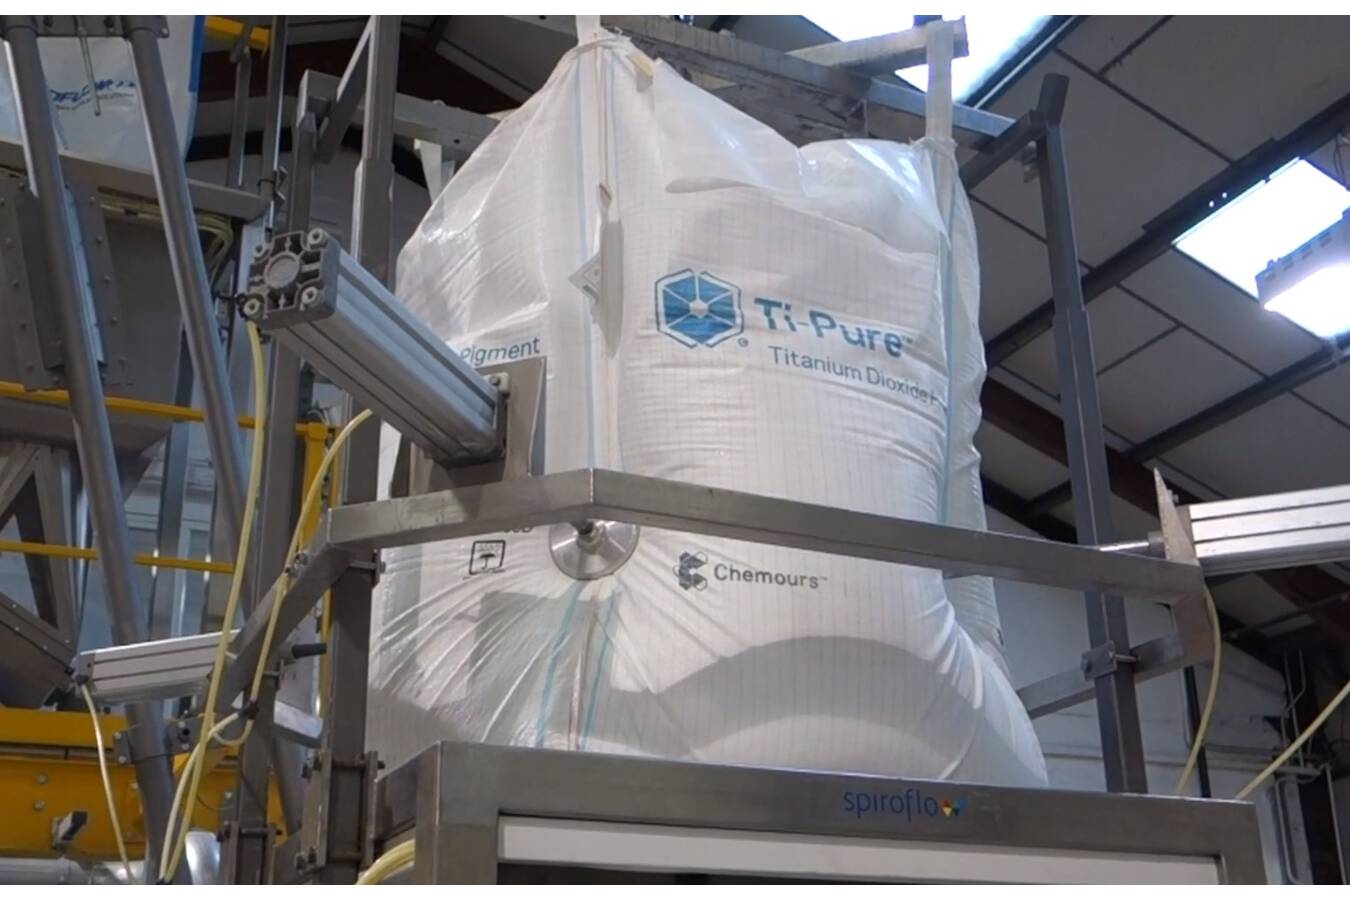 Safe handling and containment solutions of titanium dioxide As a result of legislation changes made by the EC, Spiroflow advices customers on the safe handling and containment of titanium dioxide (TiO2) powder.